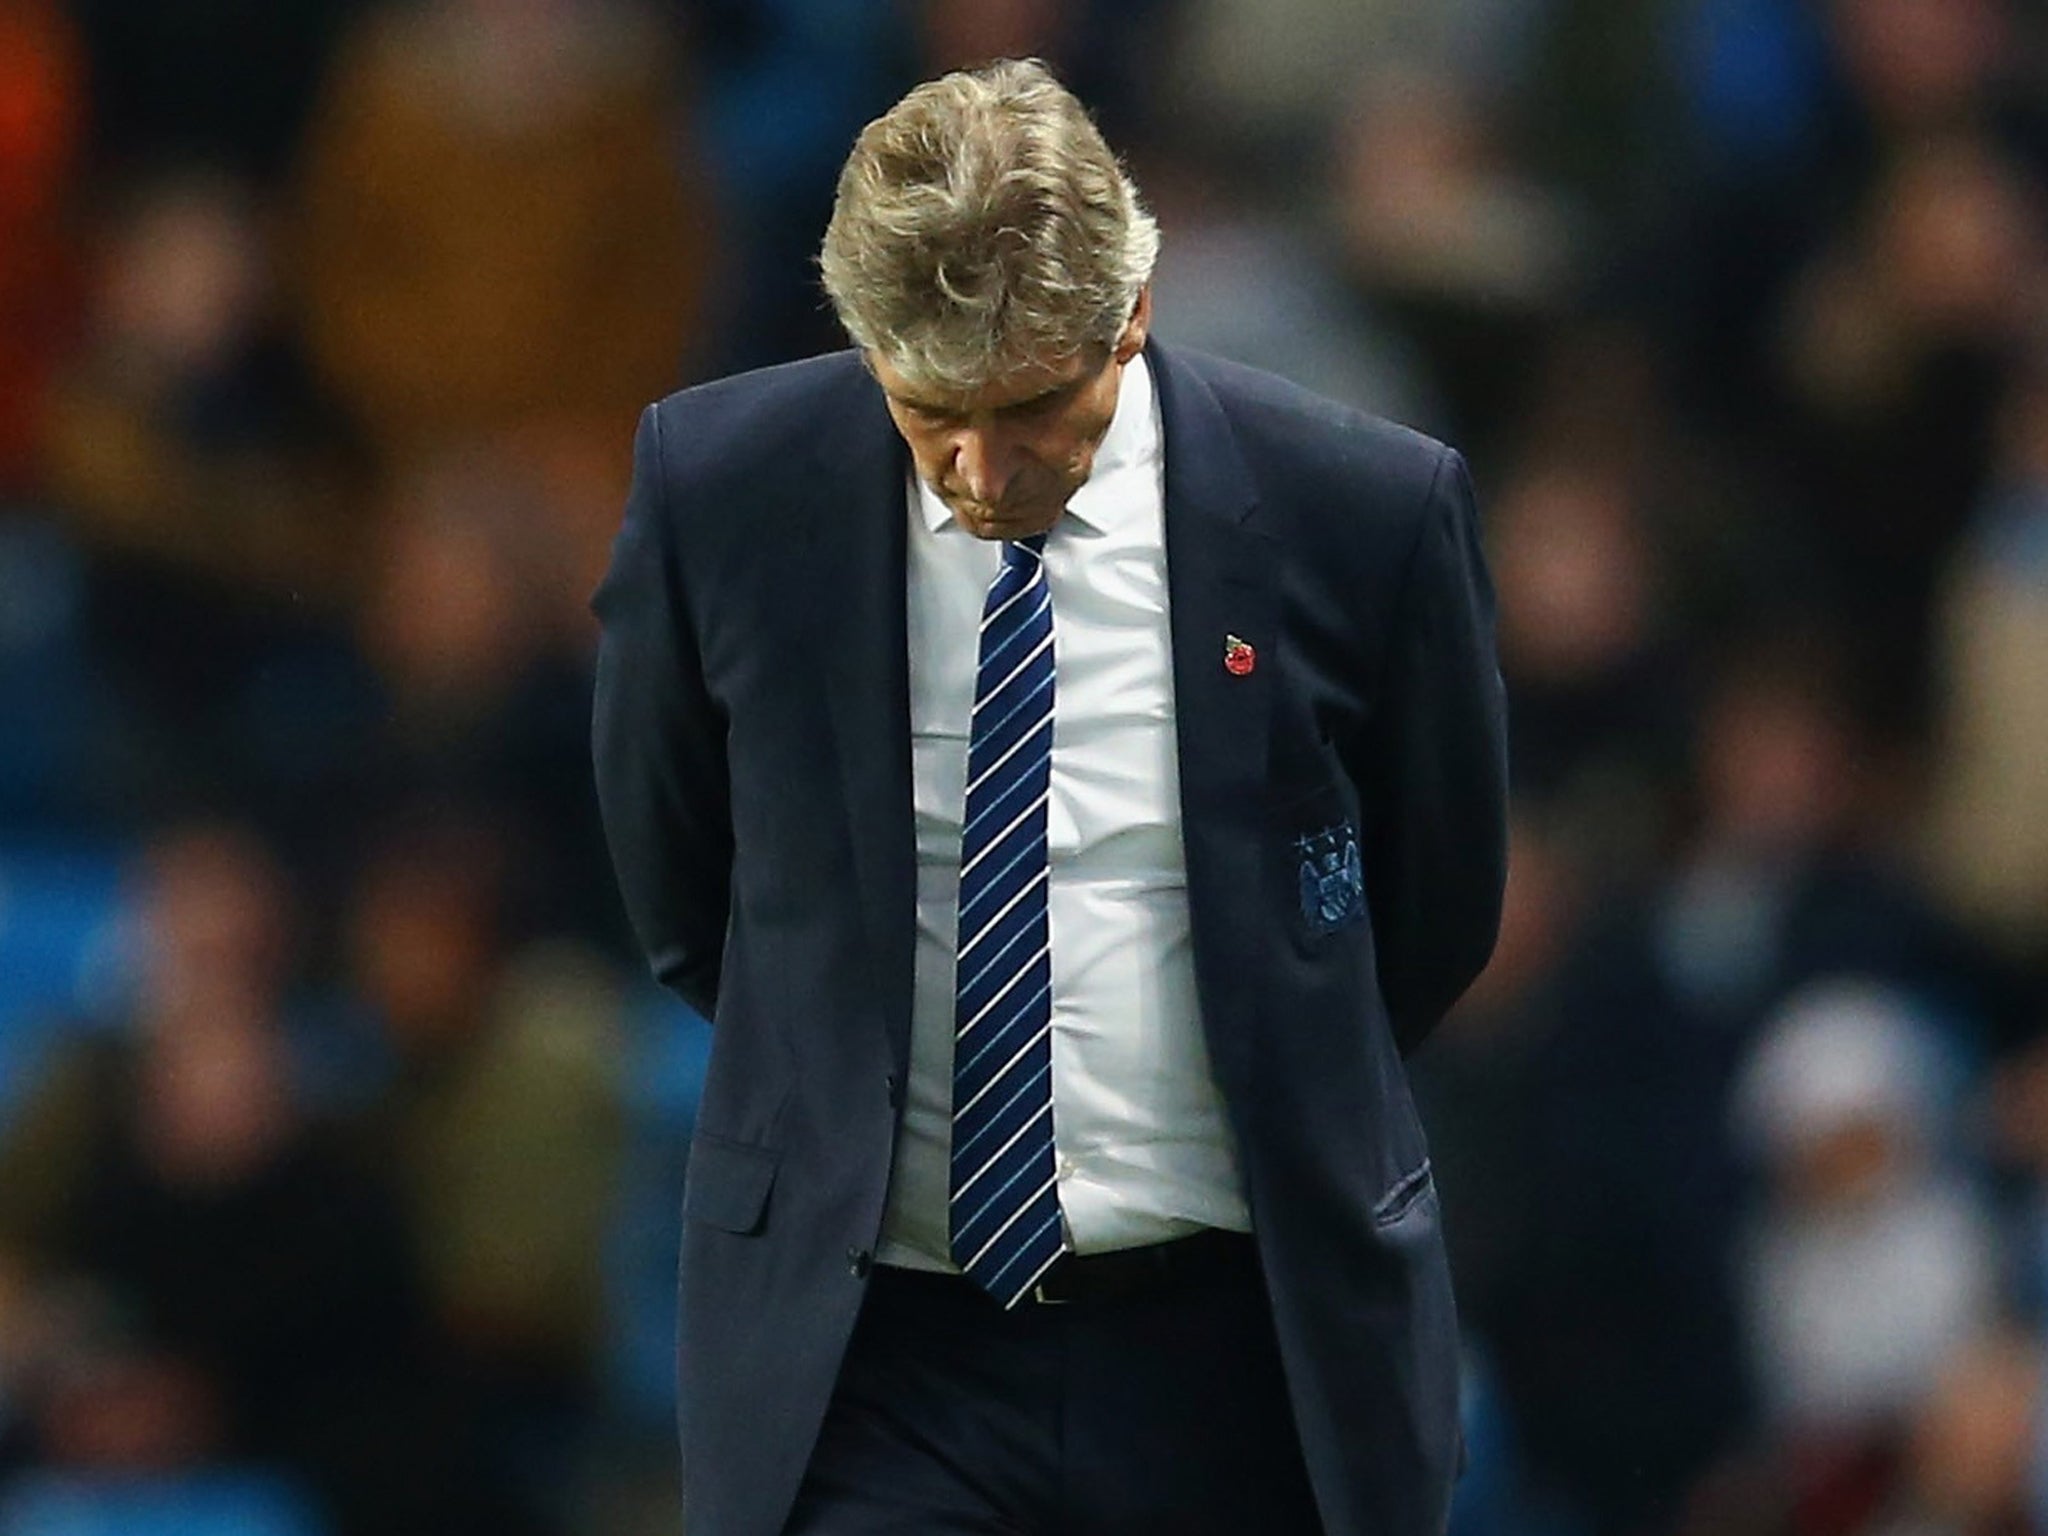 City manager Manuel Pellegrini is under pressure after a poor run